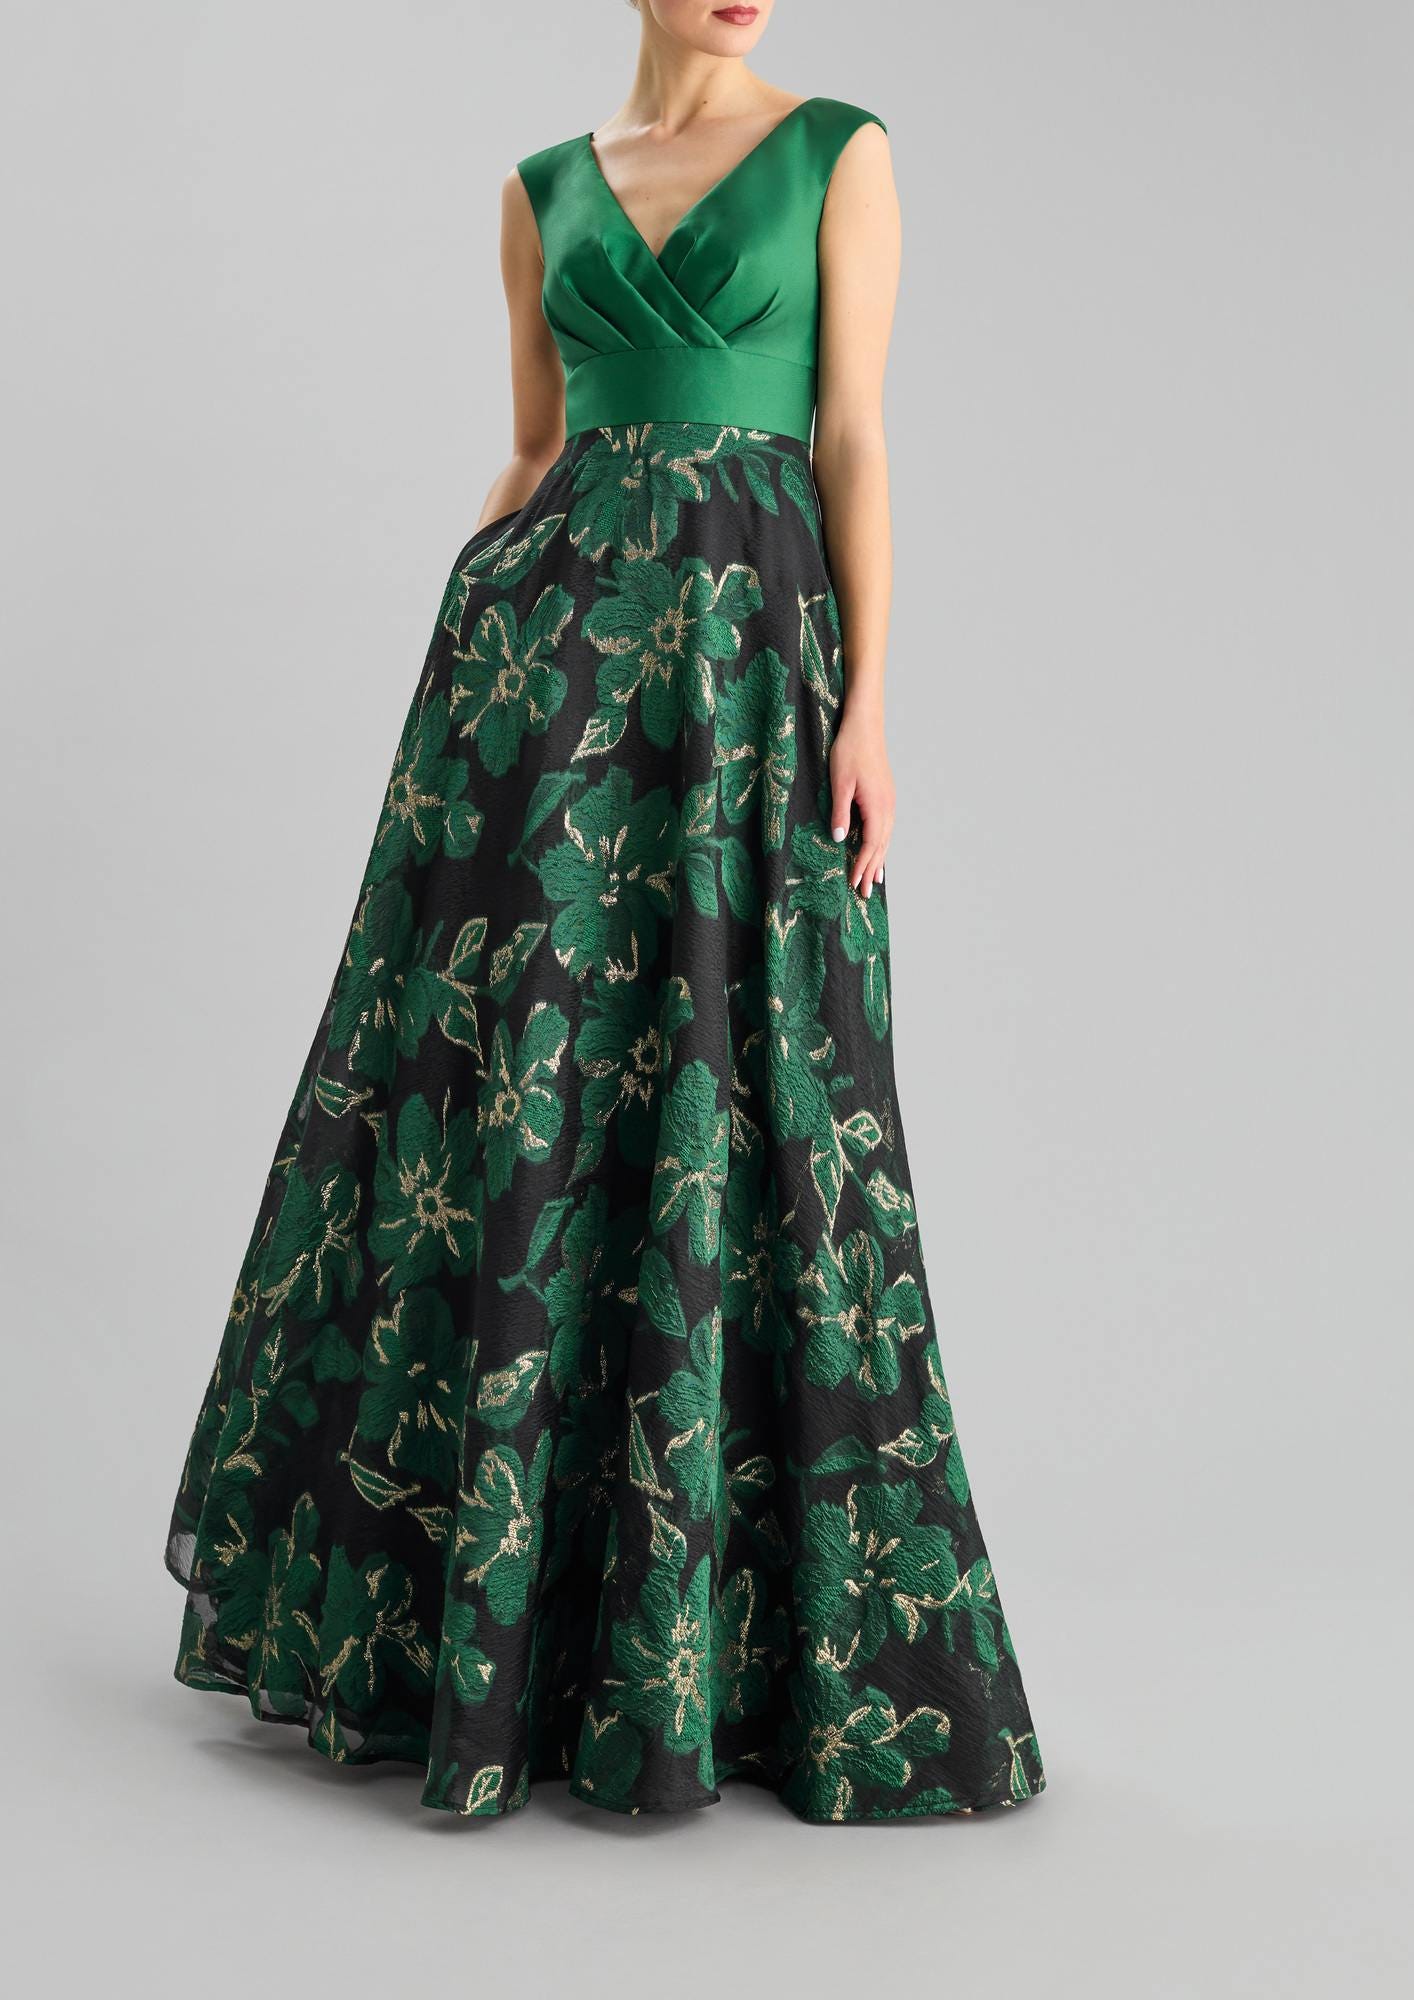 Woman wearing a green A-line wedding guest dress with V-neck, featuring floral motifs, against a grey background